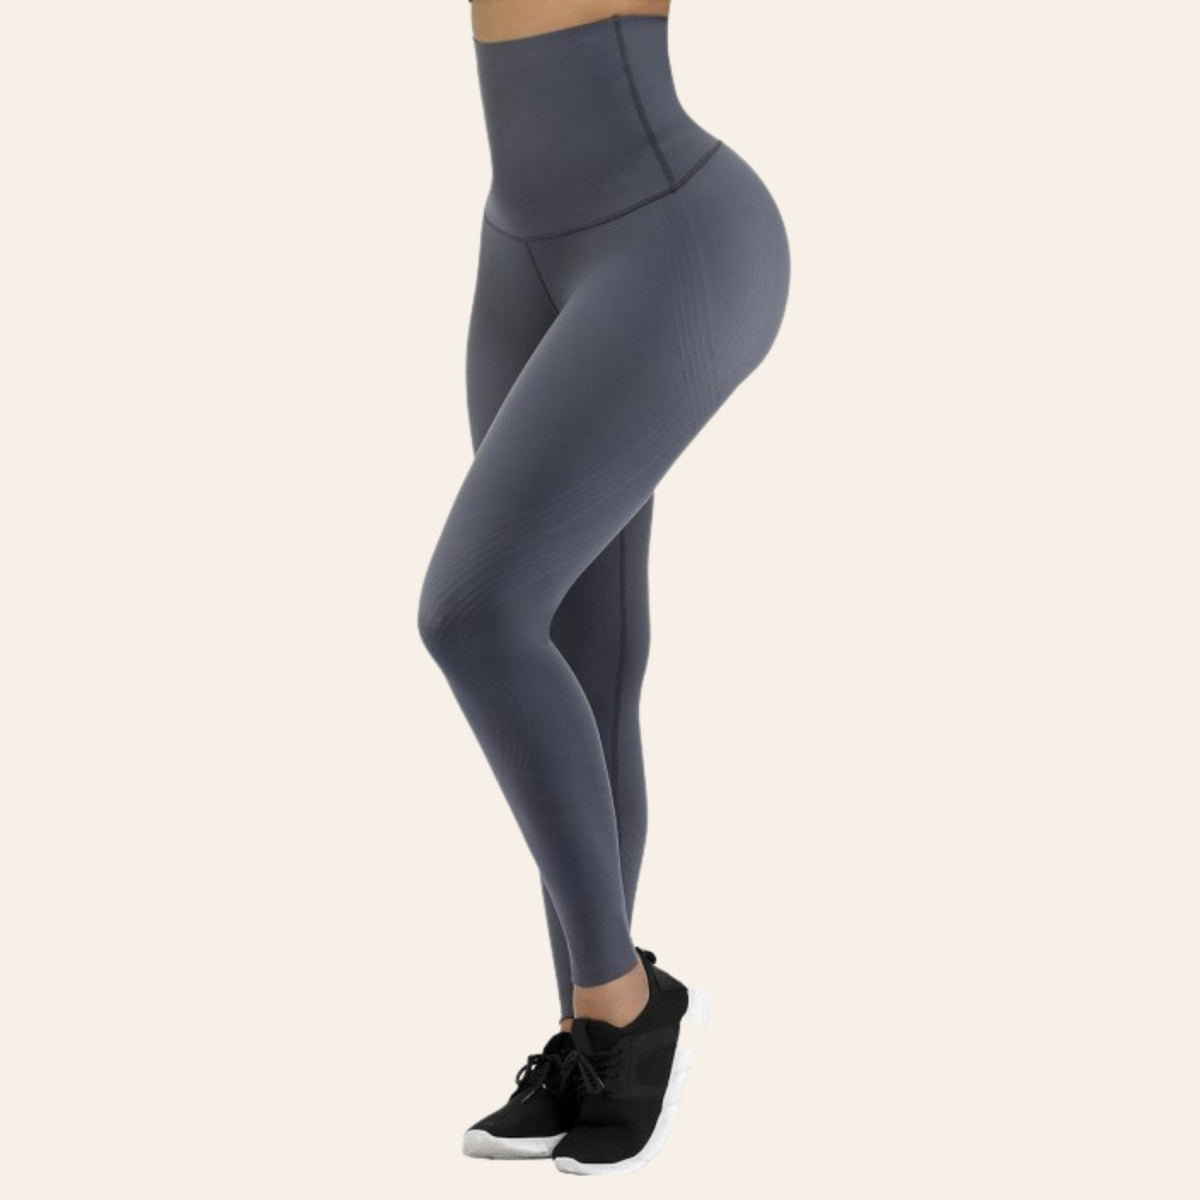 3D Extra-High-Waisted Firm Compression Legging